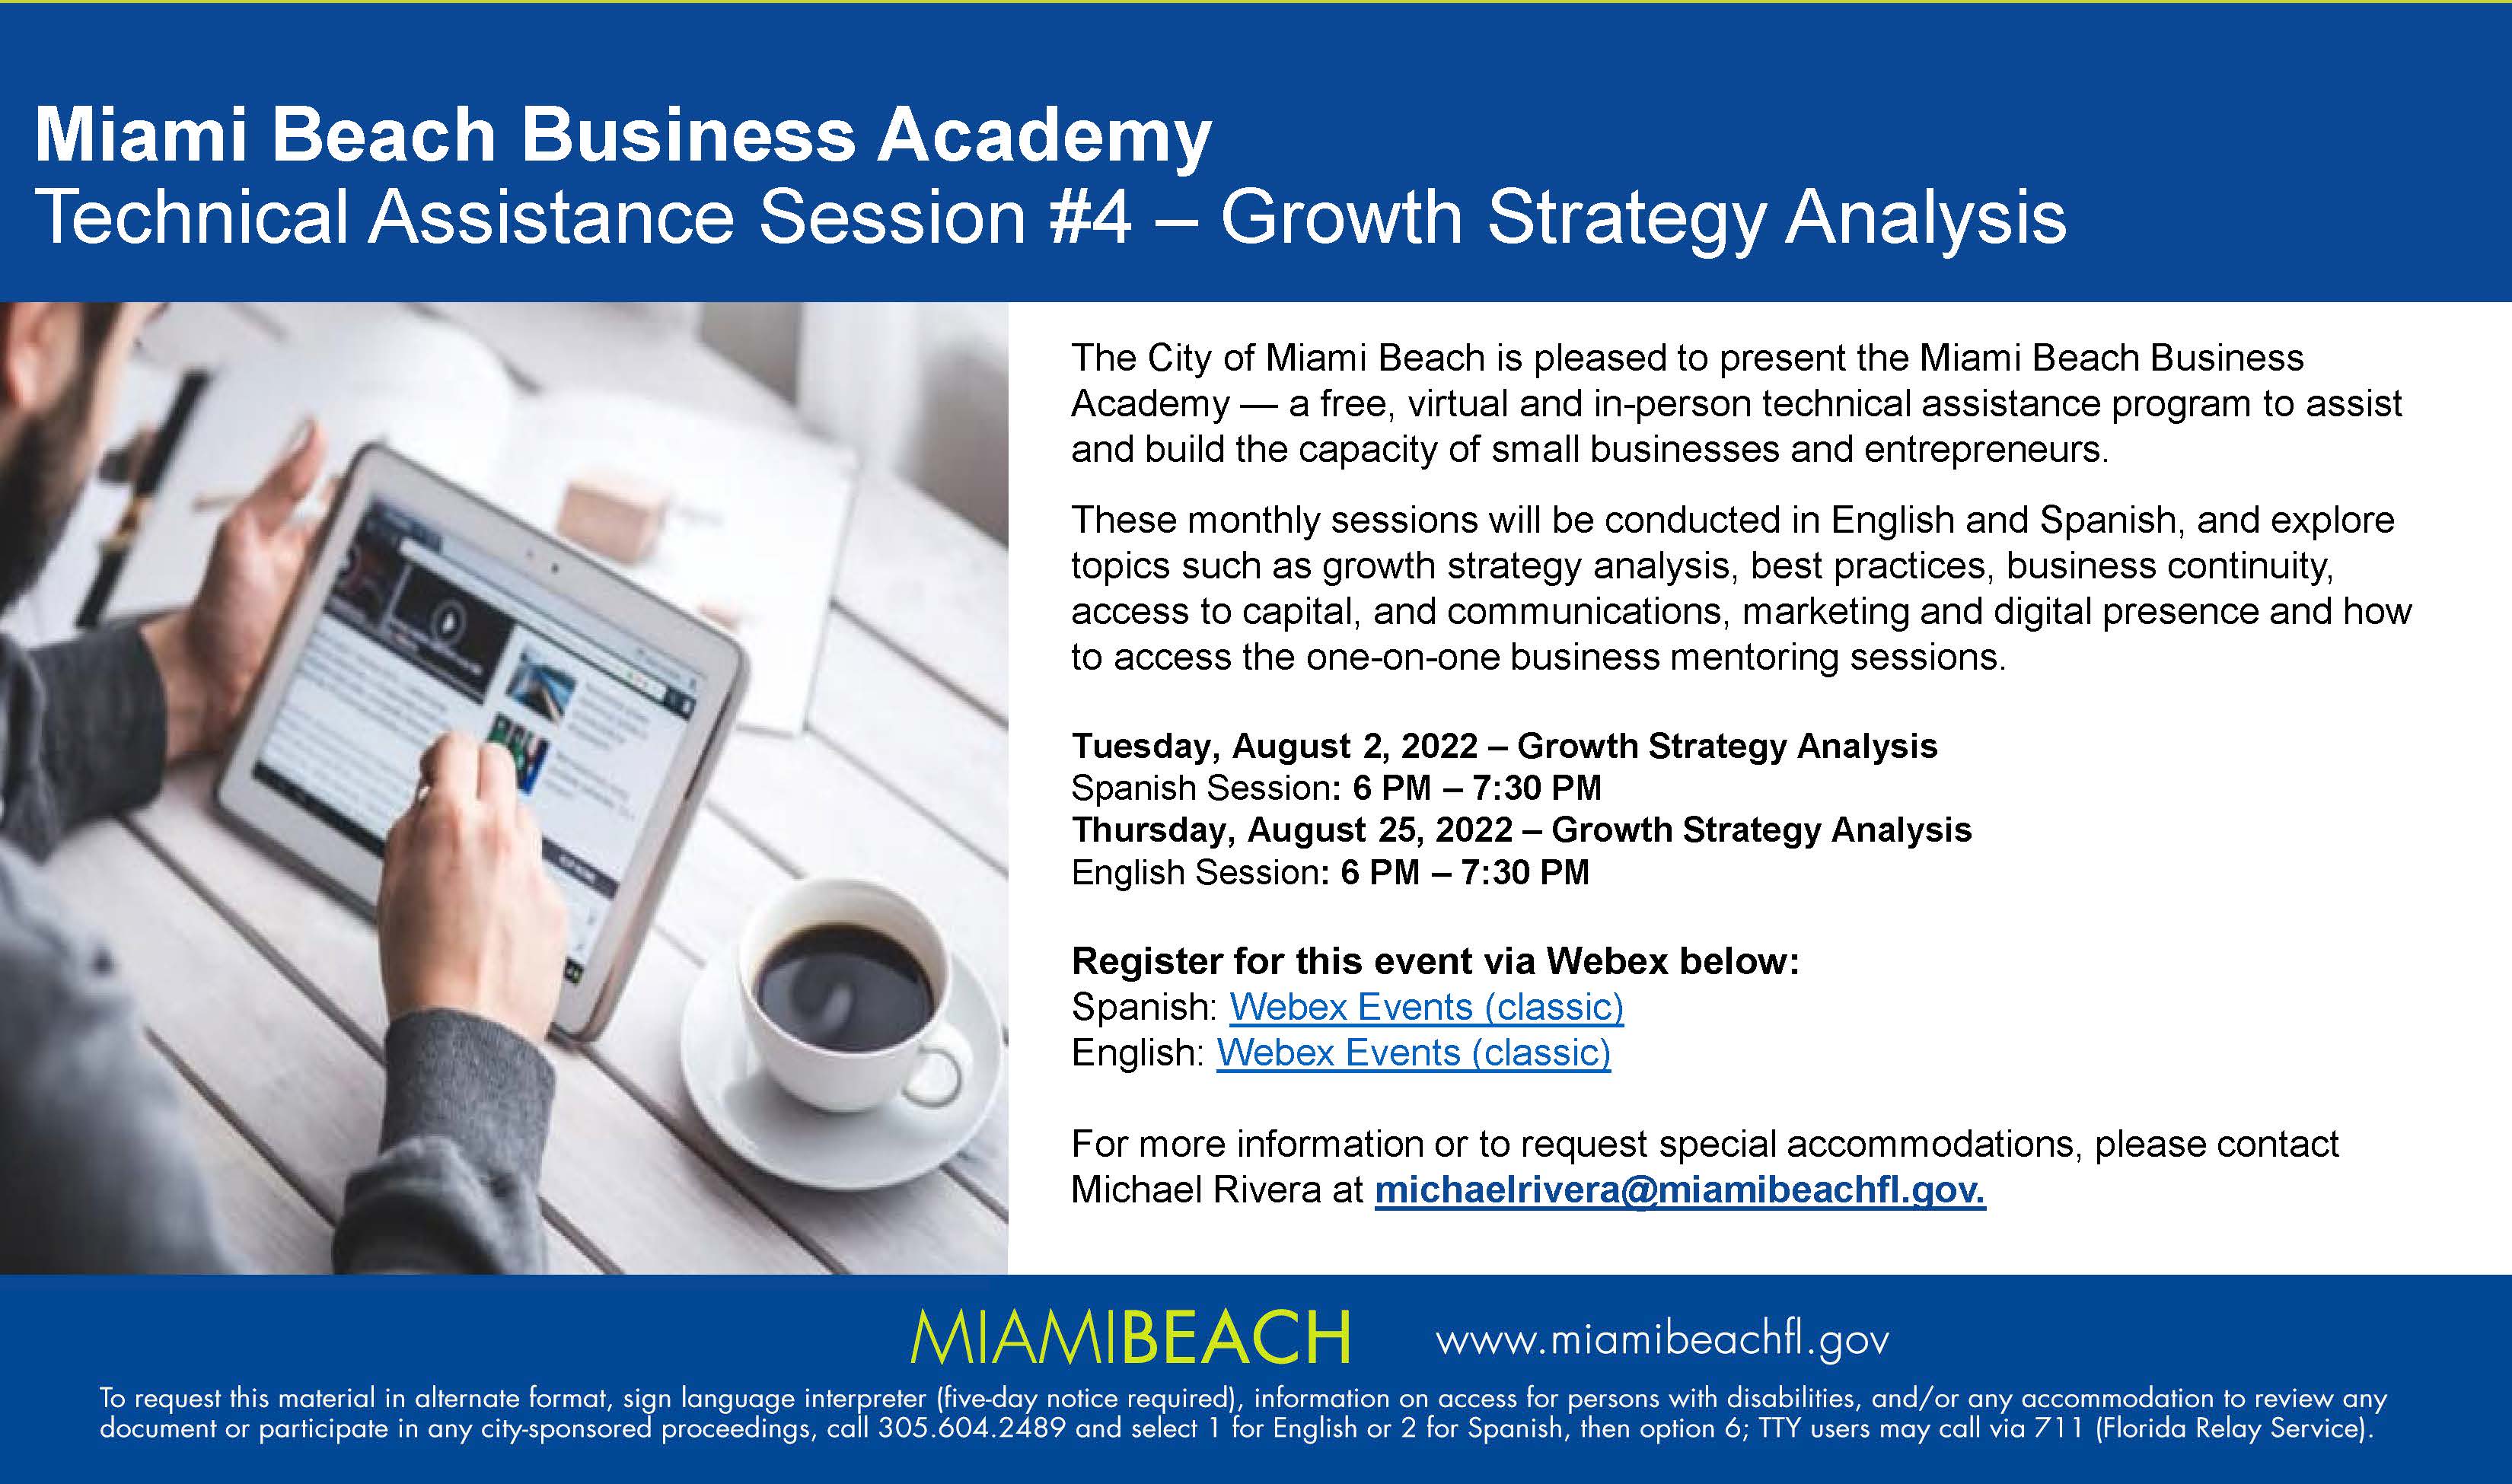 Miami Beach Business Academy Technical Assistance Session #4 (English)